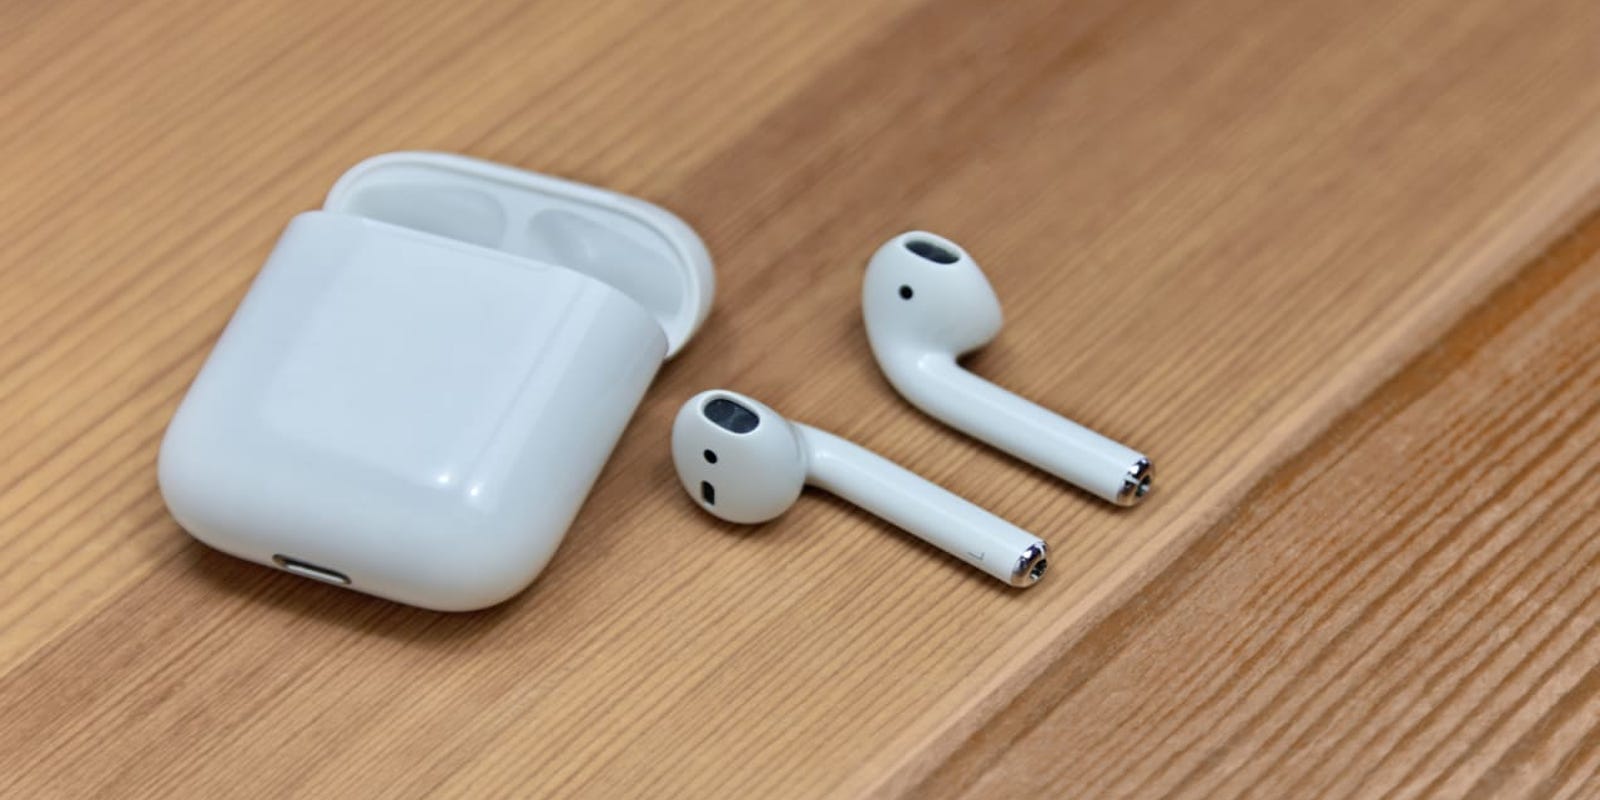 Apple AirPods deal: Snag refurbished AirPods for an insane price on Amazon